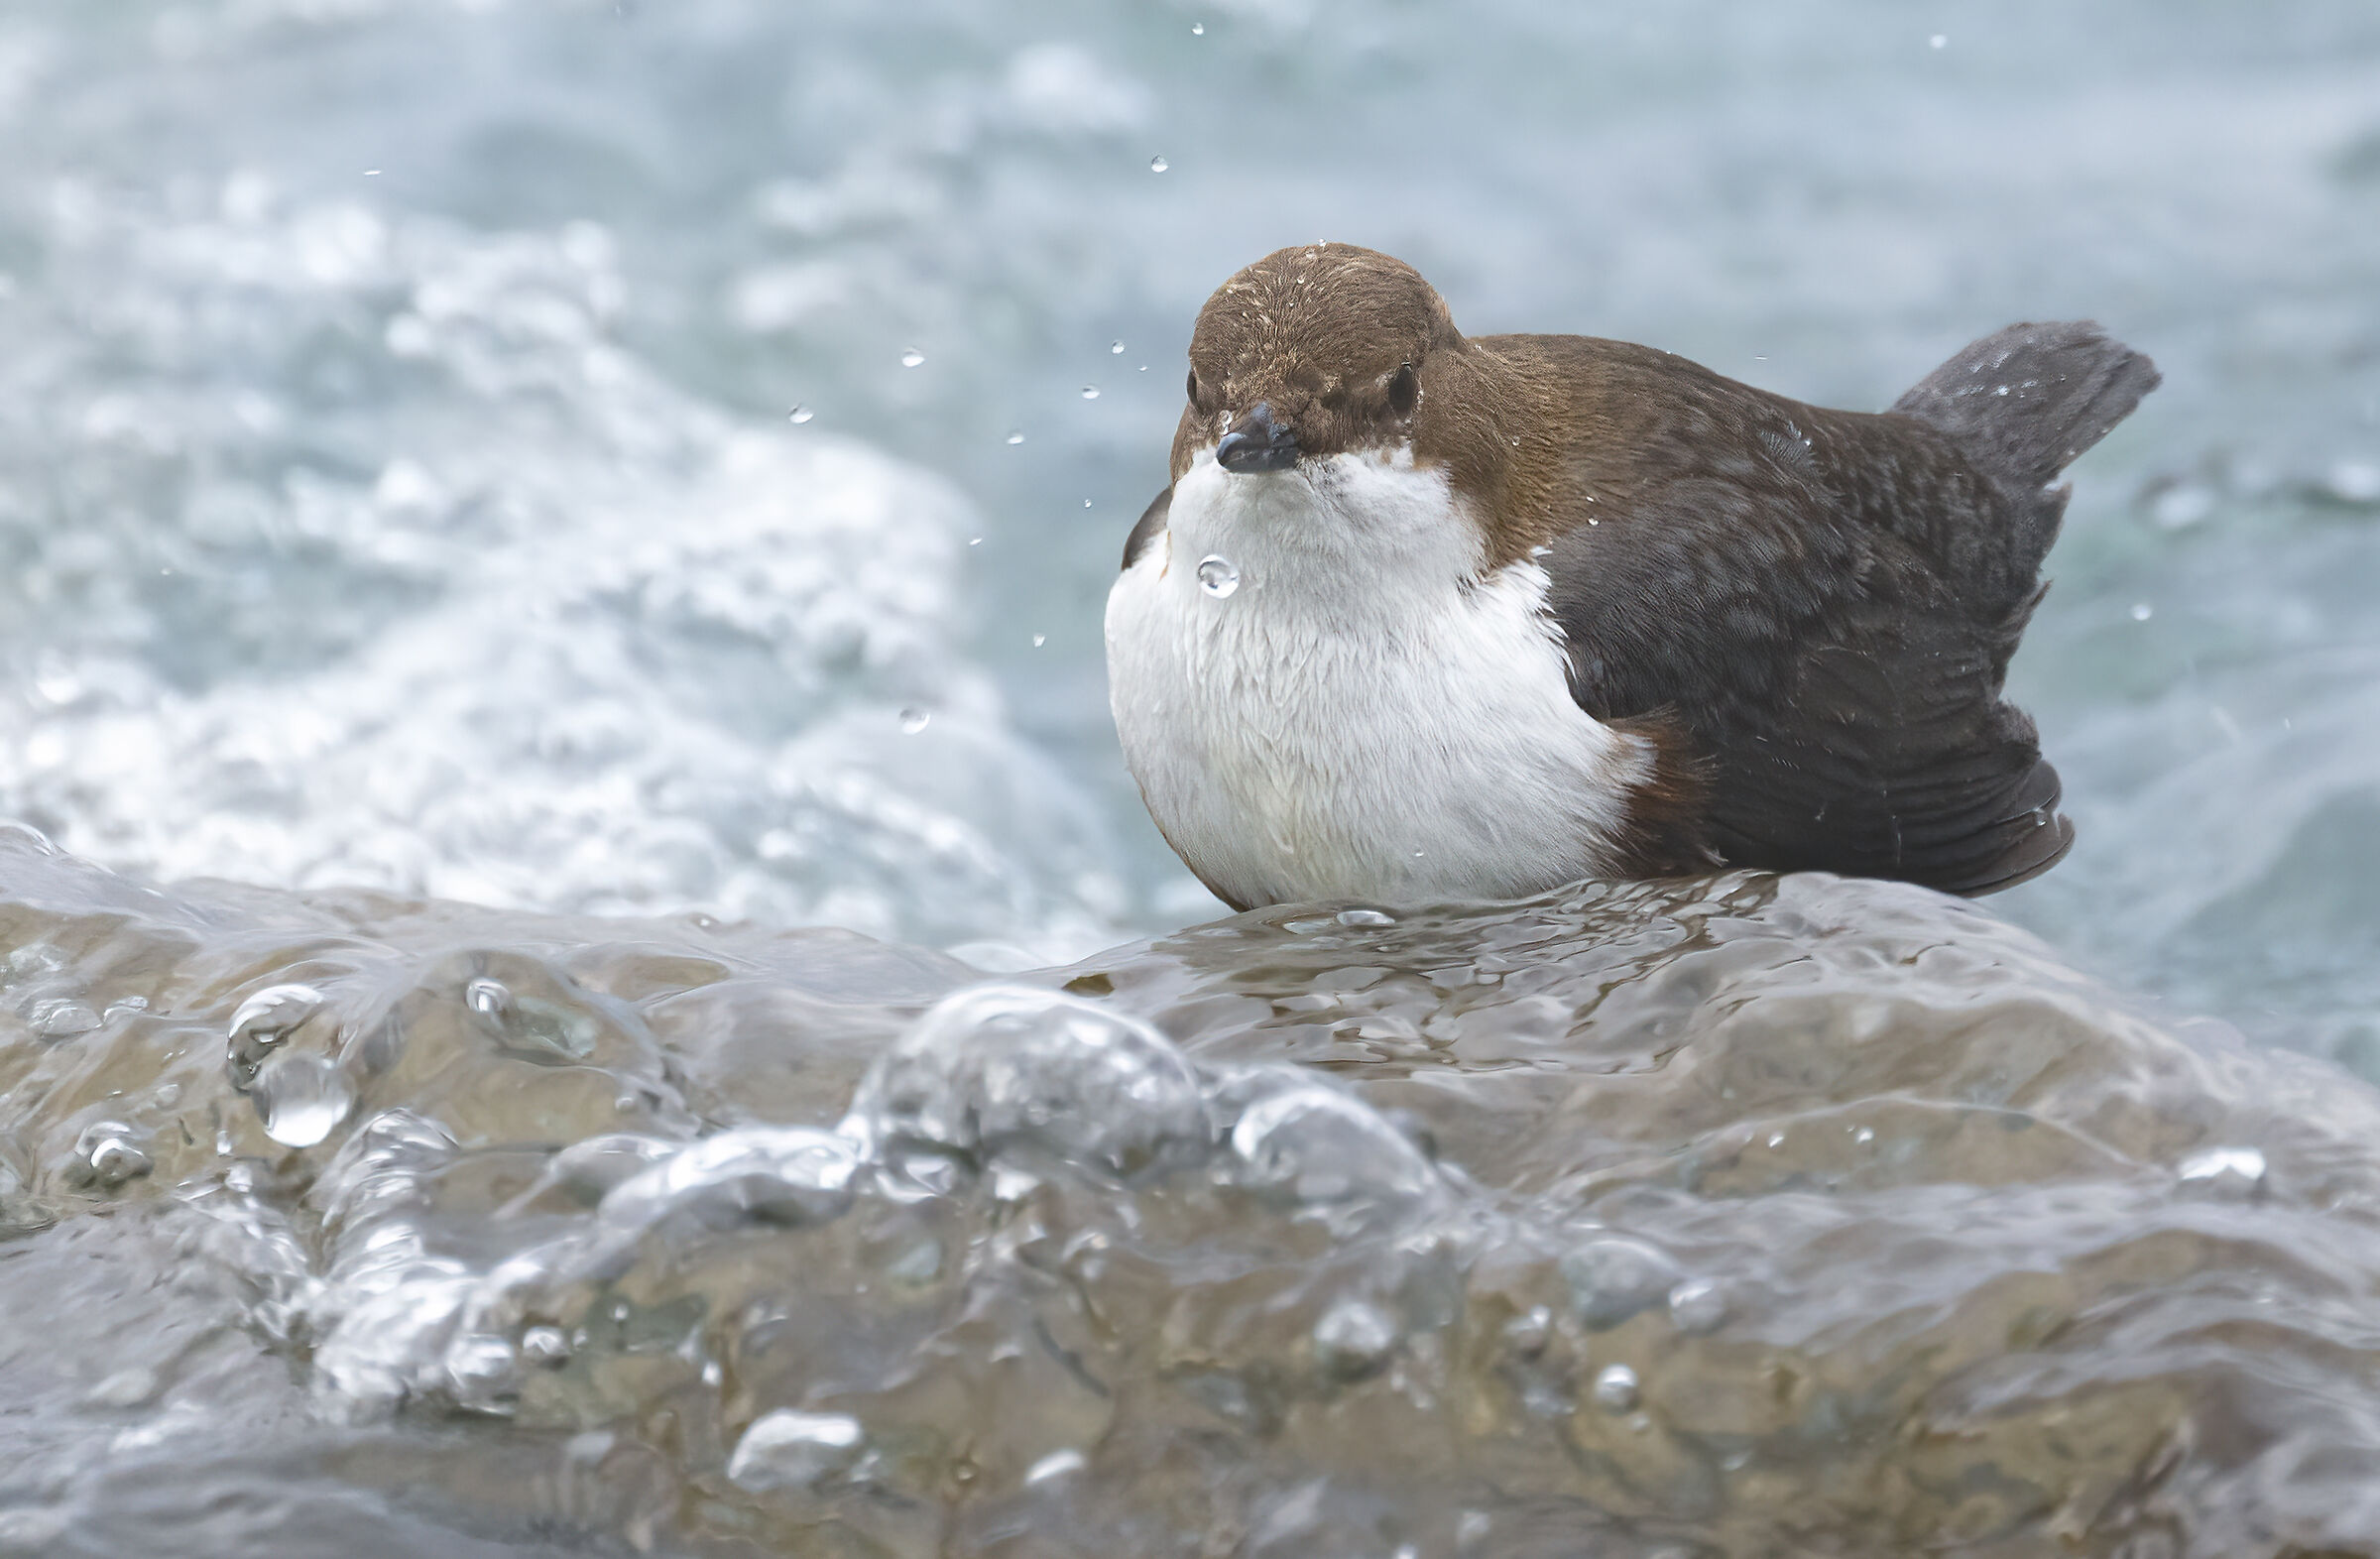 Above the waterfall, dipper...